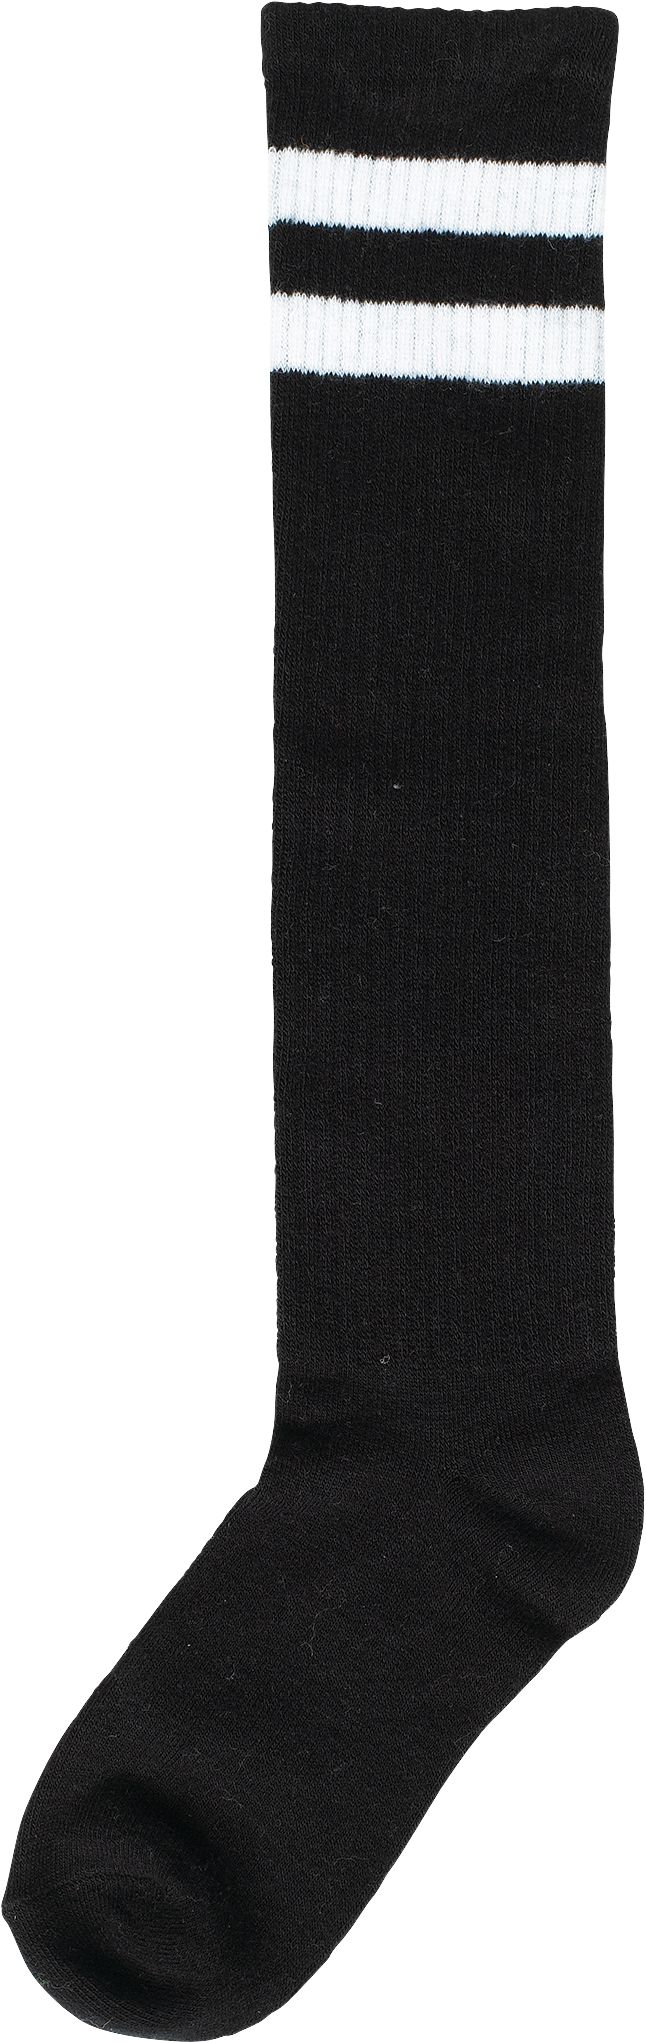 Adult Athletic Knee High Socks, Assorted Colours Striped, One Size,  Wearable Costume Accessory for Halloween